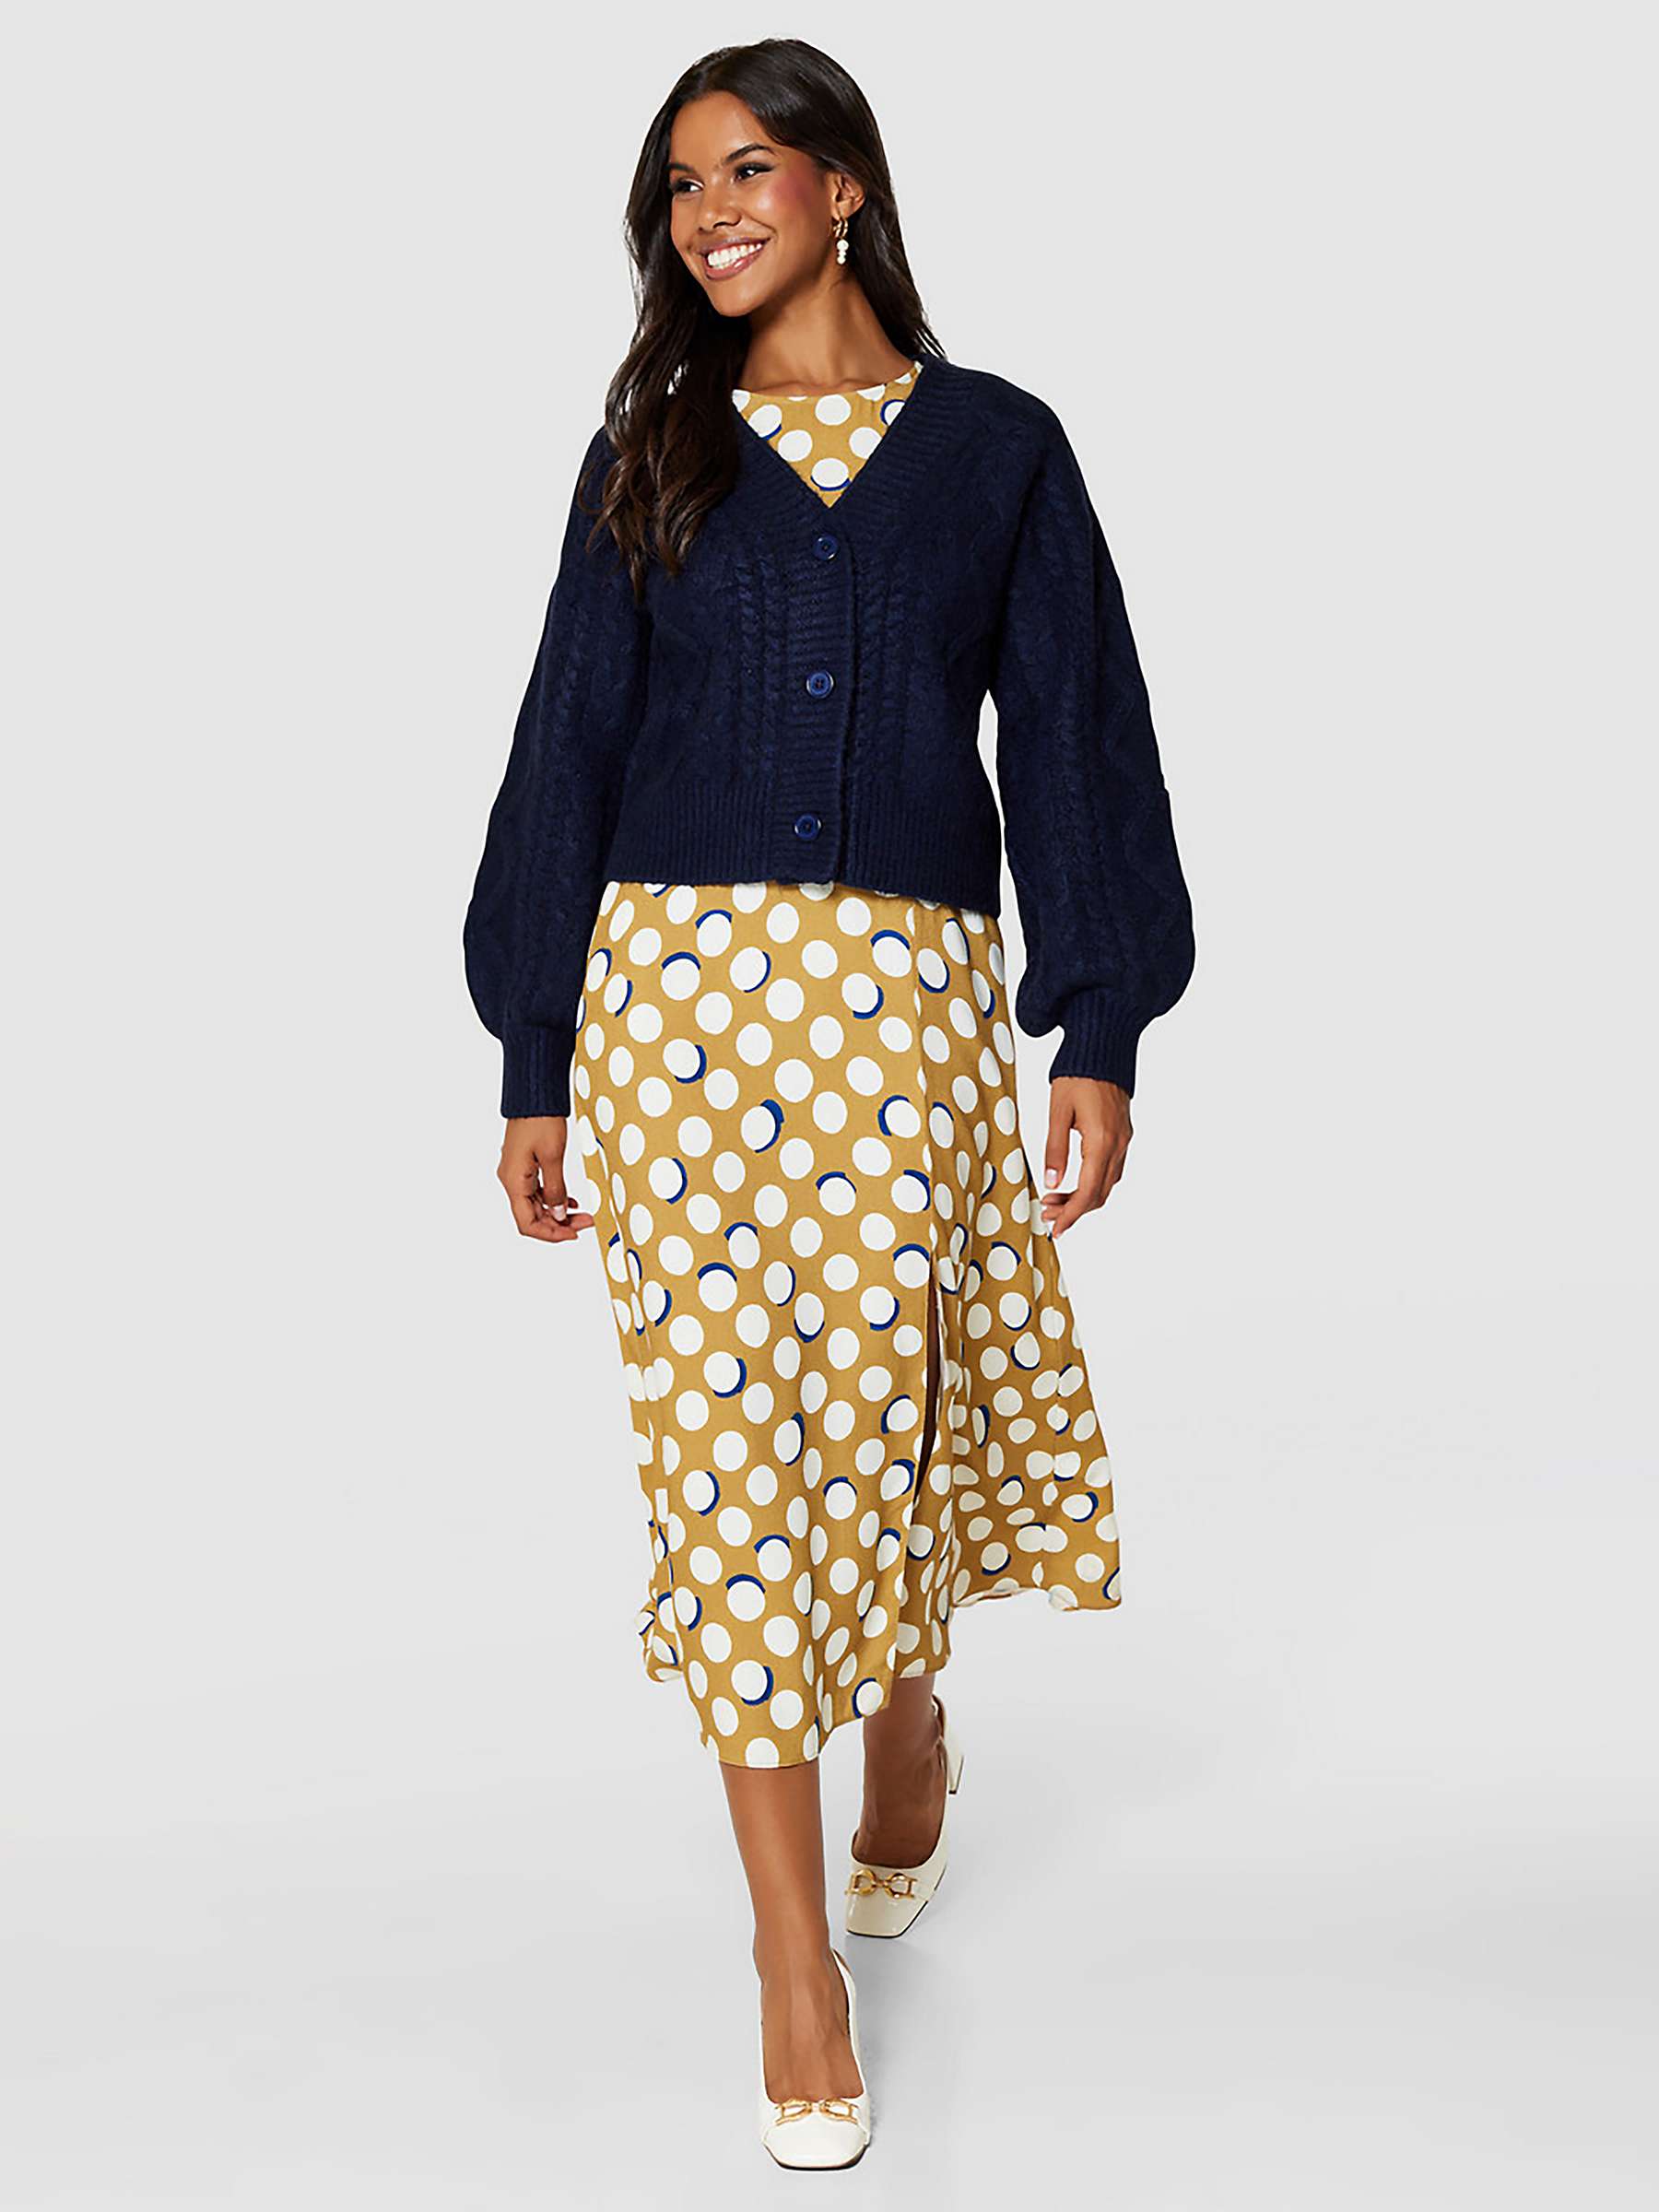 Buy Closet London Cable Knit Cardigan, Navy Online at johnlewis.com